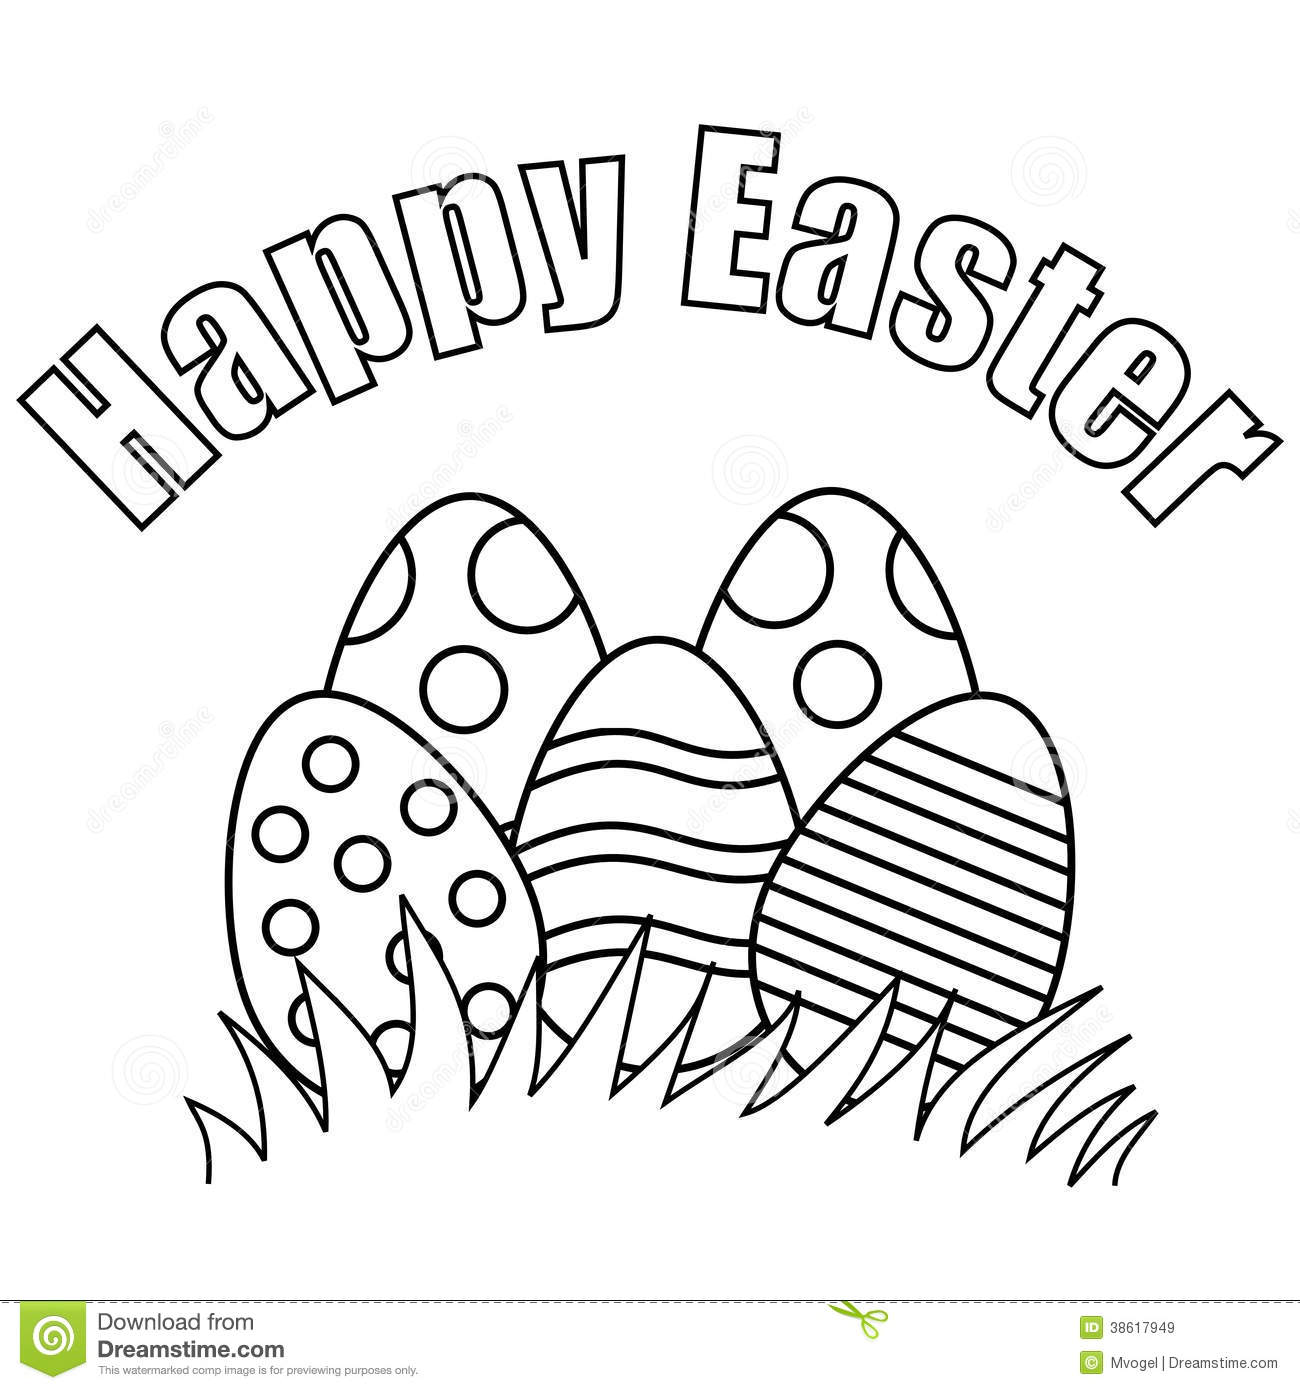 Happy easter clipart black an - Easter Clip Art Black And White